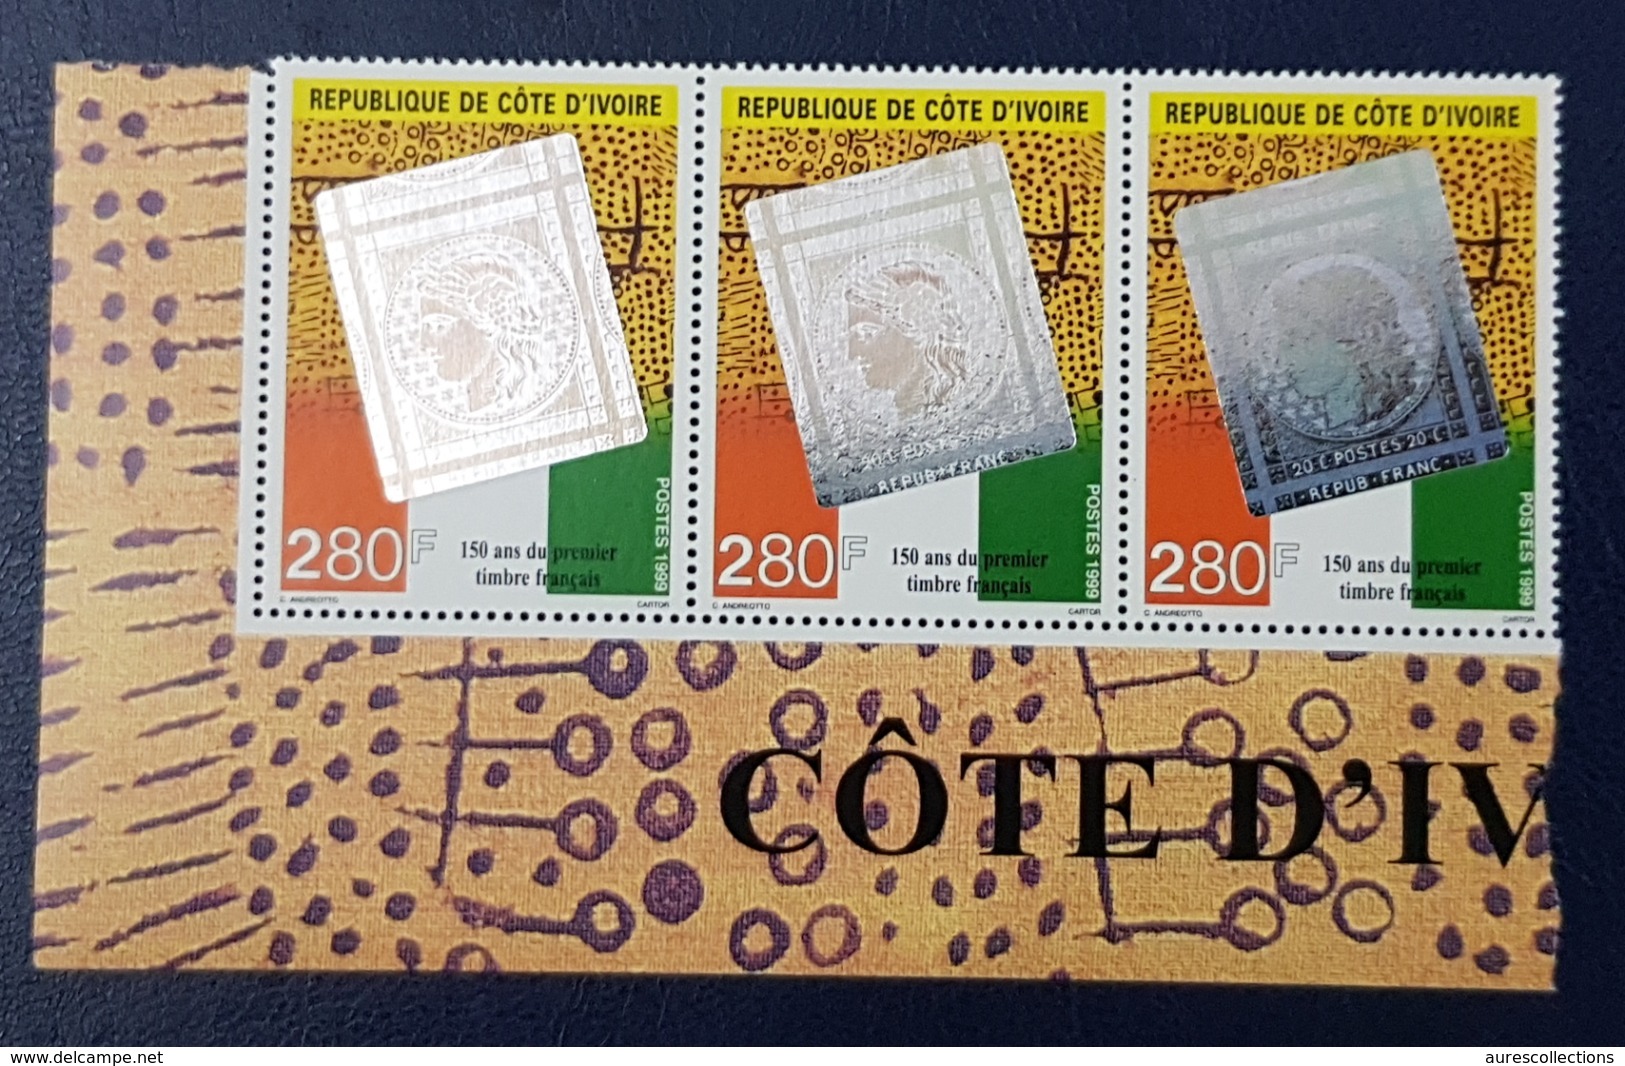 COTE D'IVOIRE IVORY COAST 1999 - 3 X - PHILEXAFRIQUE FIRST FRENCH STAMP TIMBRE FRANCAIS HOLOGRAM - MNH - Hologramme